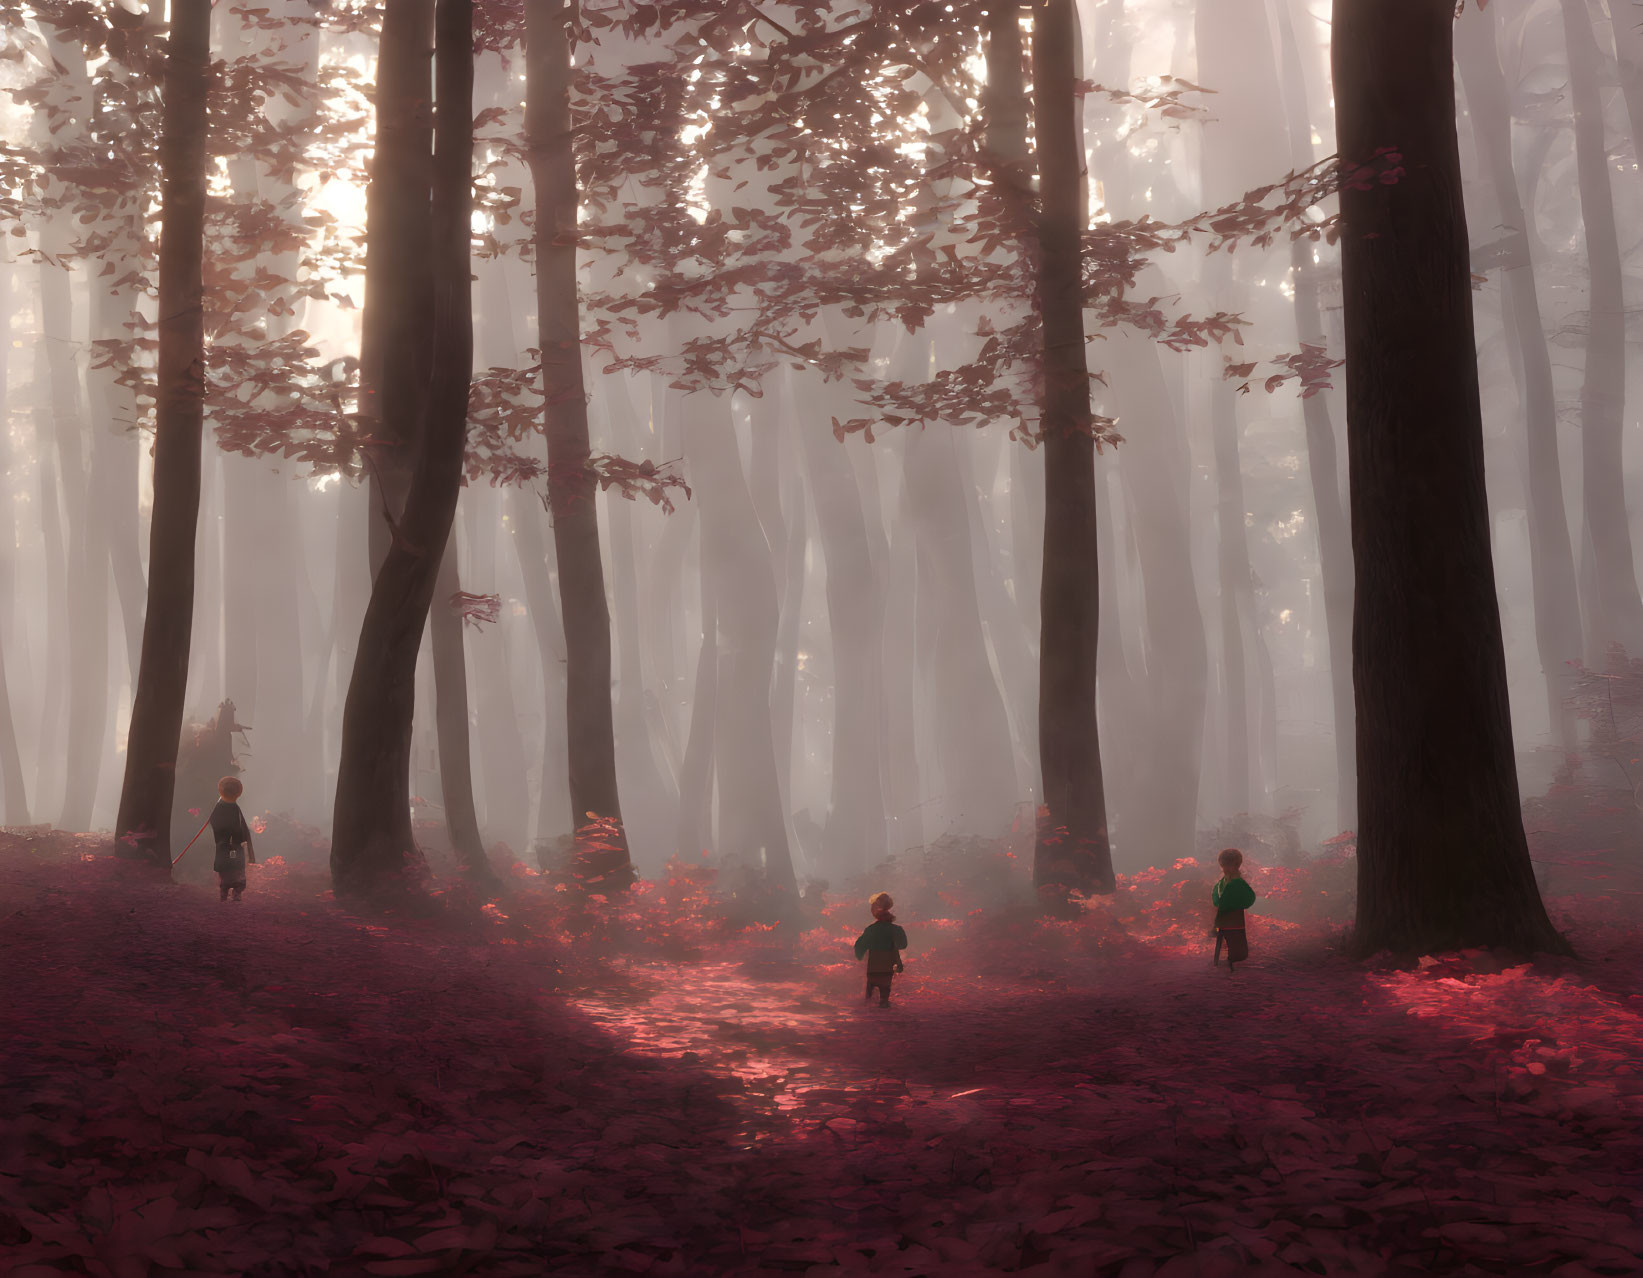 Misty forest with tall trees and red leaves, people walking on path